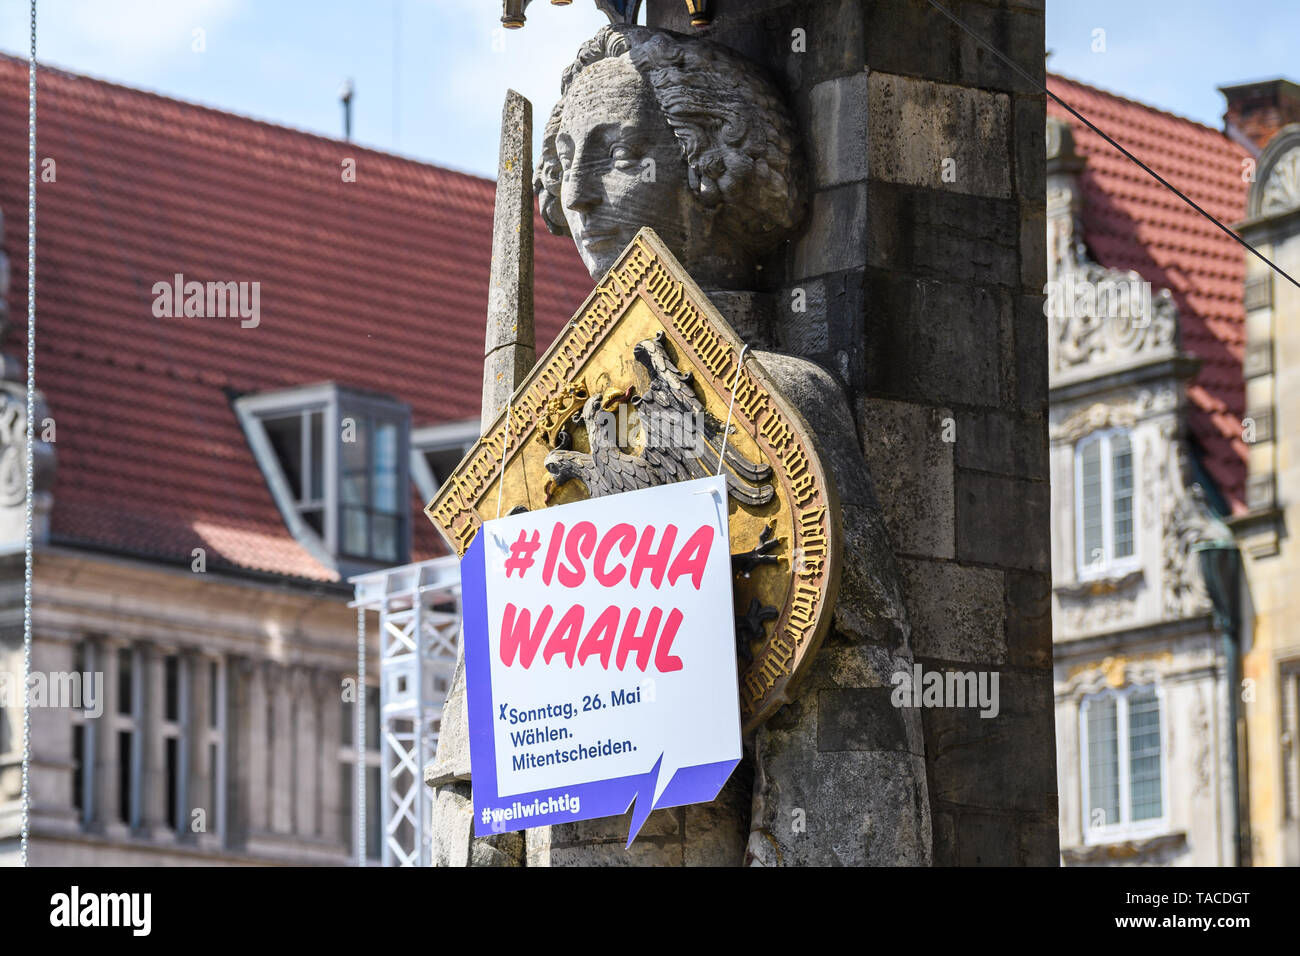 Bremen, Germany. 23rd May, 2019. A few days before the election of the citizens of Bremen a sign with the inscription '#ISCHA WAAHL - Sonntag 26. Mai Wählen. Co-decide.' . On 26 May, the citizens' elections will take place in Bremen. Credit: Mohssen Assanimoghaddam/dpa/Alamy Live News Stock Photo